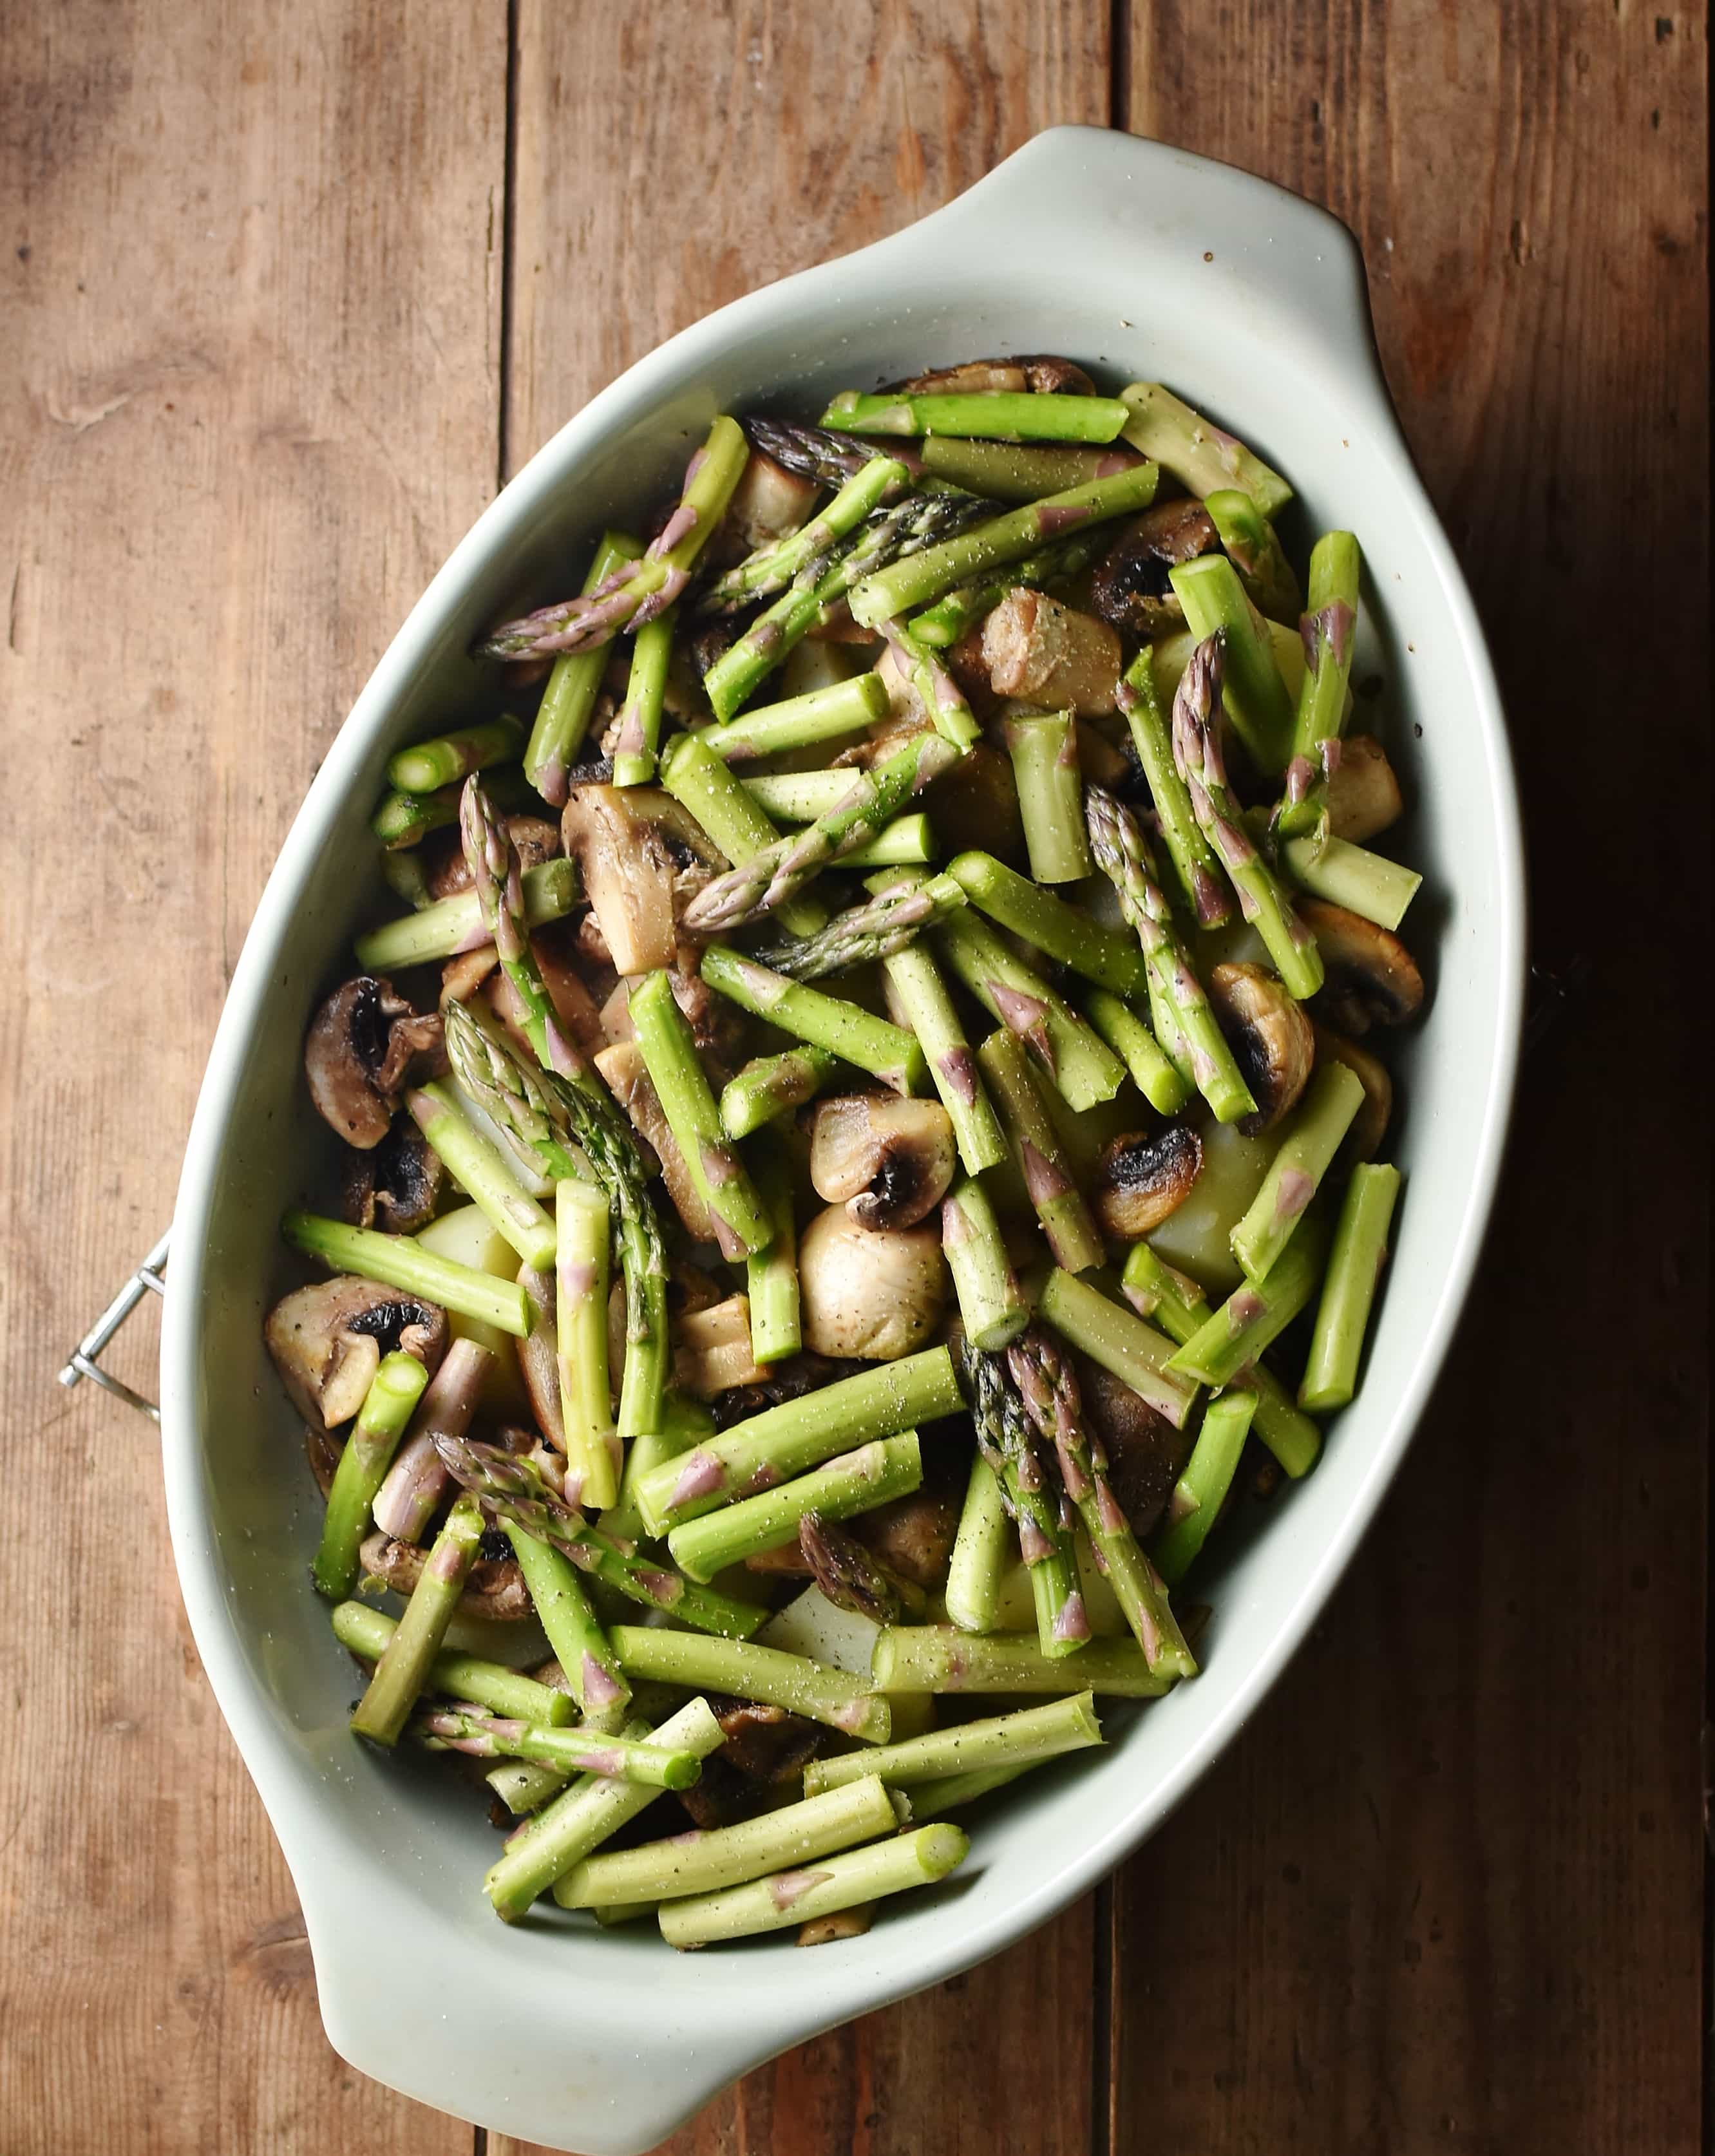 Chopped asparagus and mushrooms in oval dish.